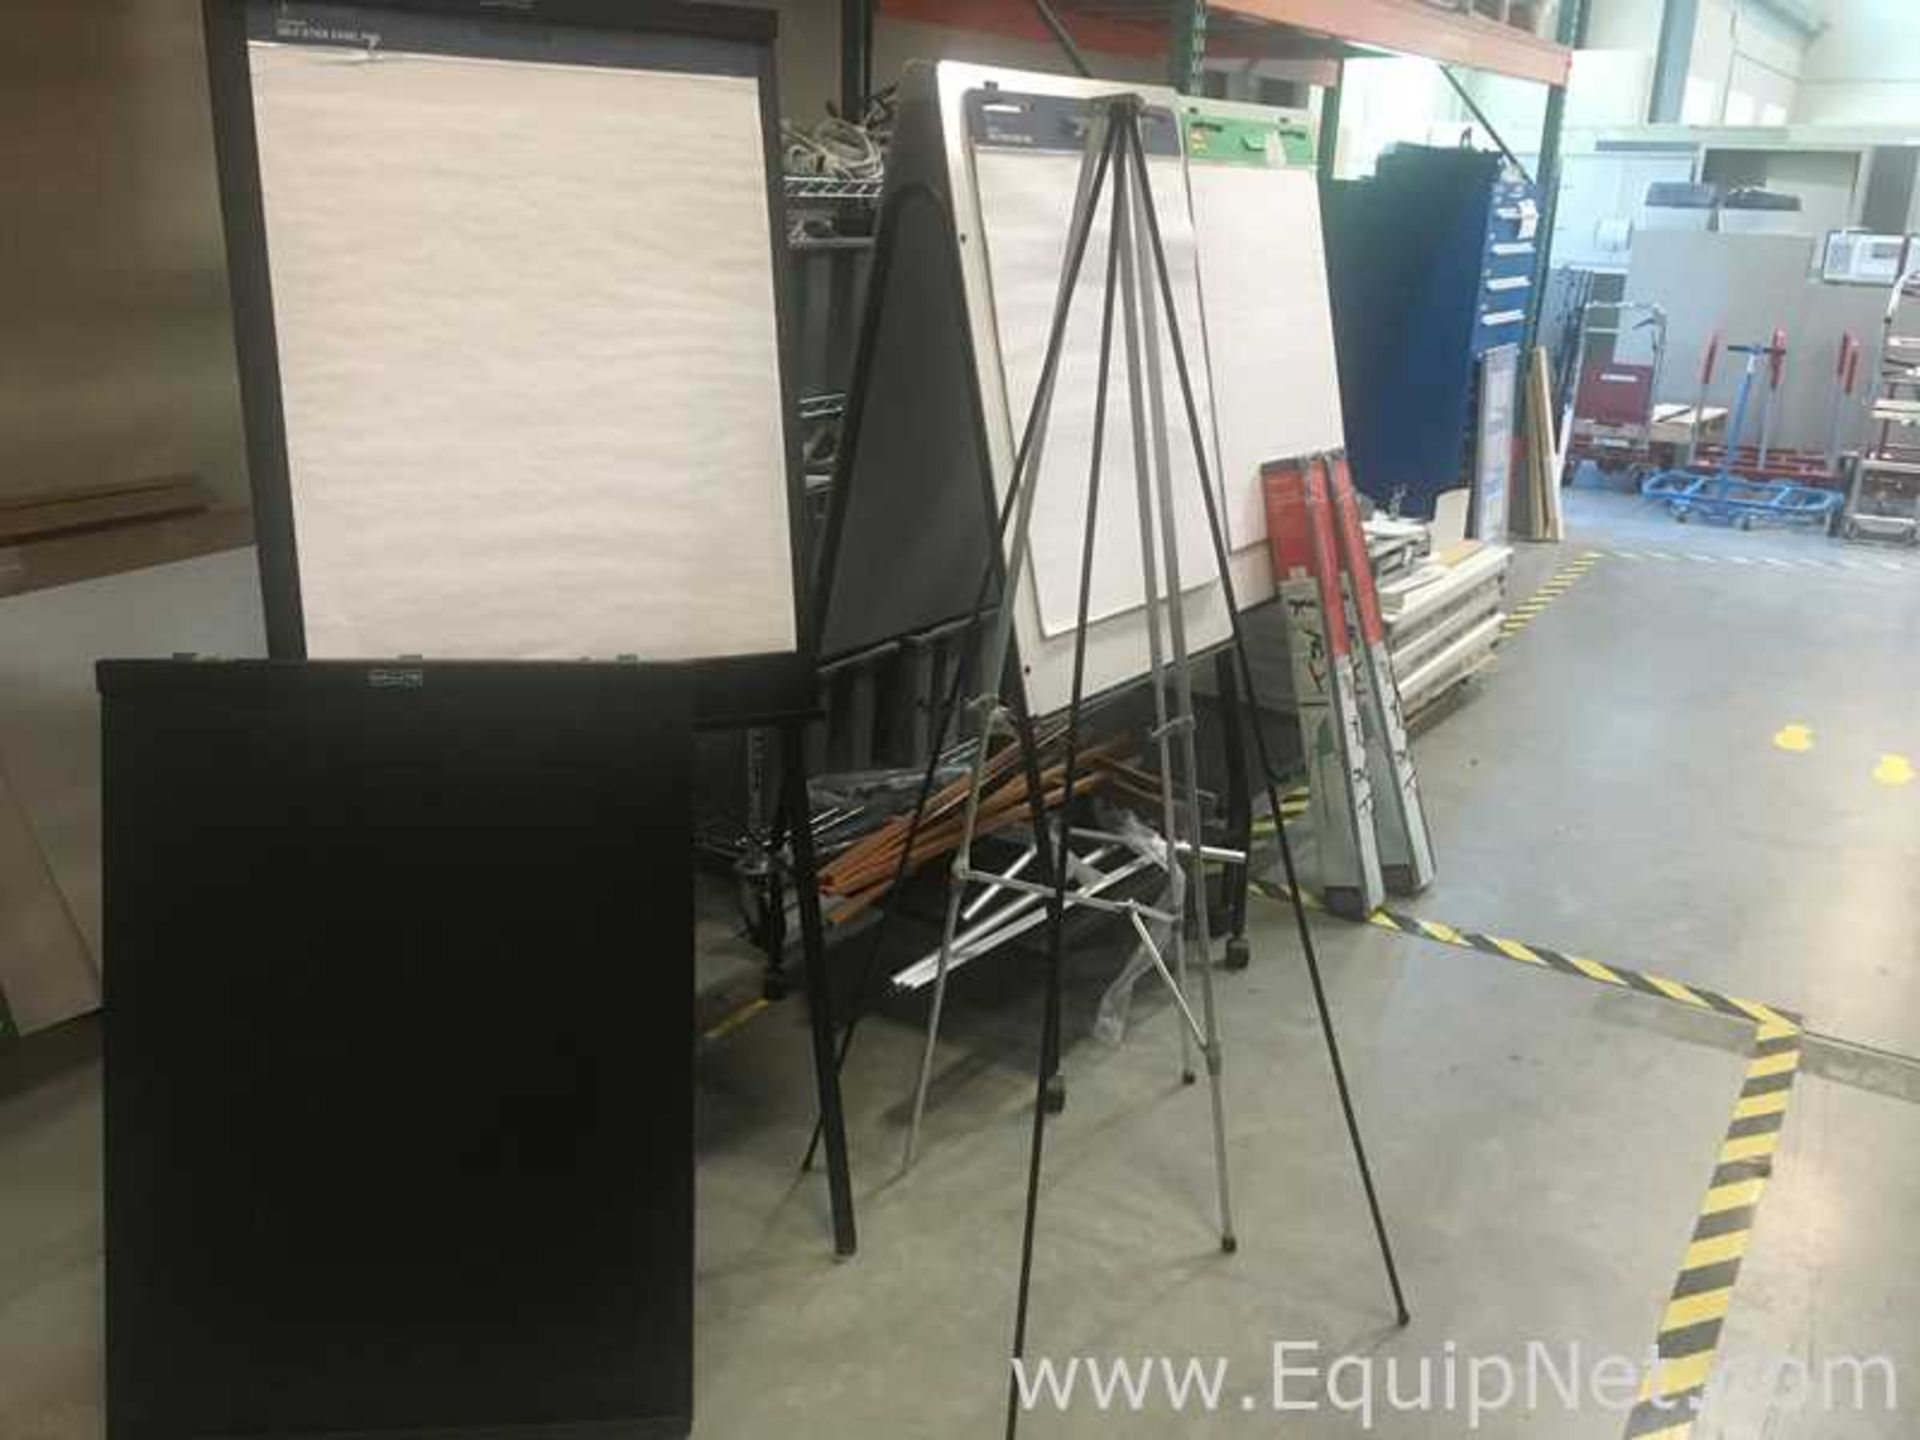 Lot of Assorted Whiteboards Easels and Cork Boards - Image 2 of 7